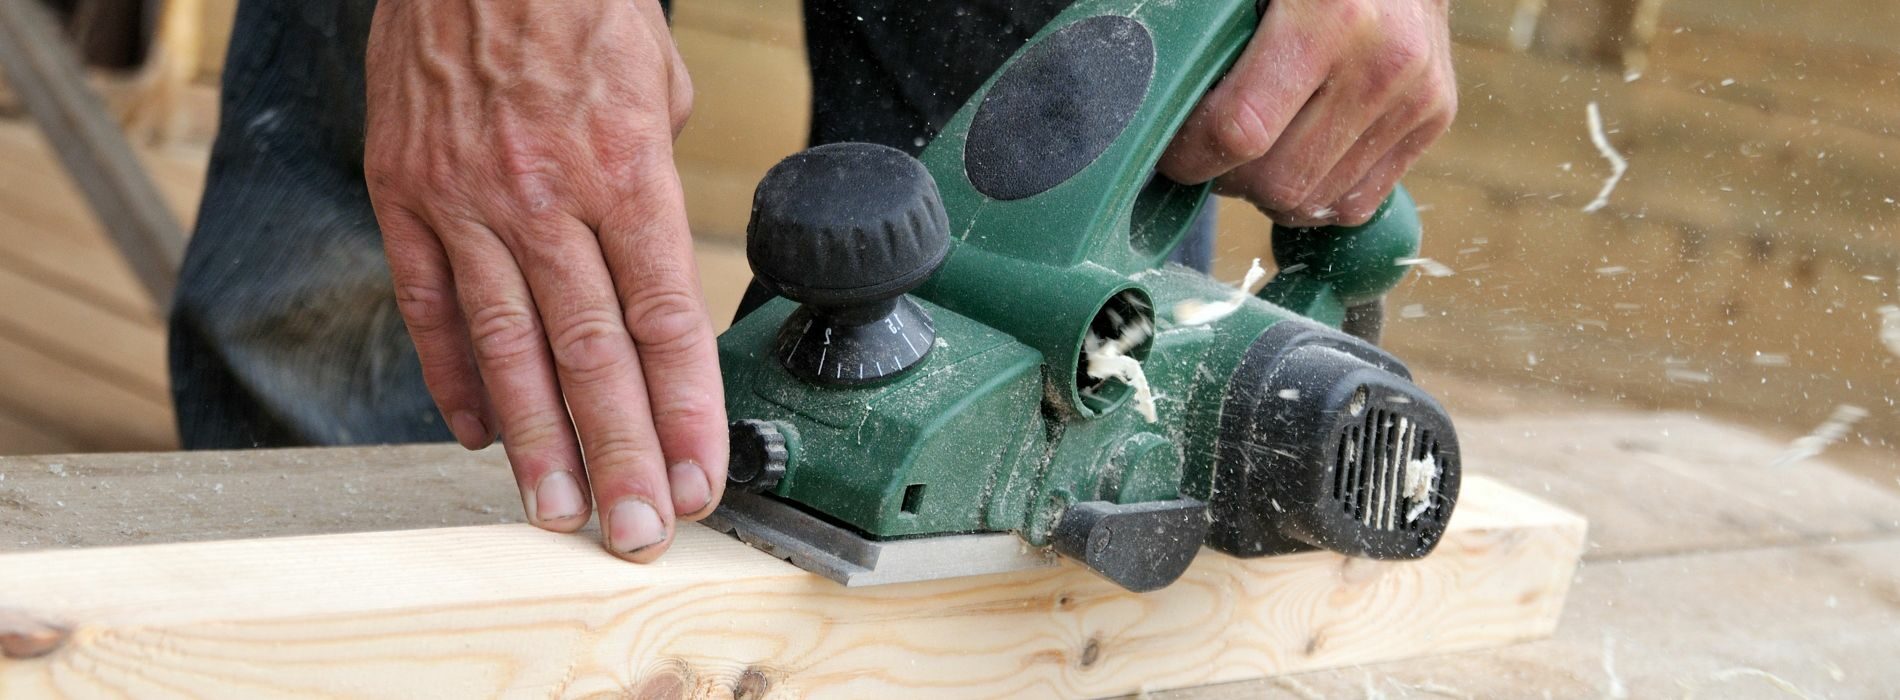 A person using a power tool on a piece of wood.